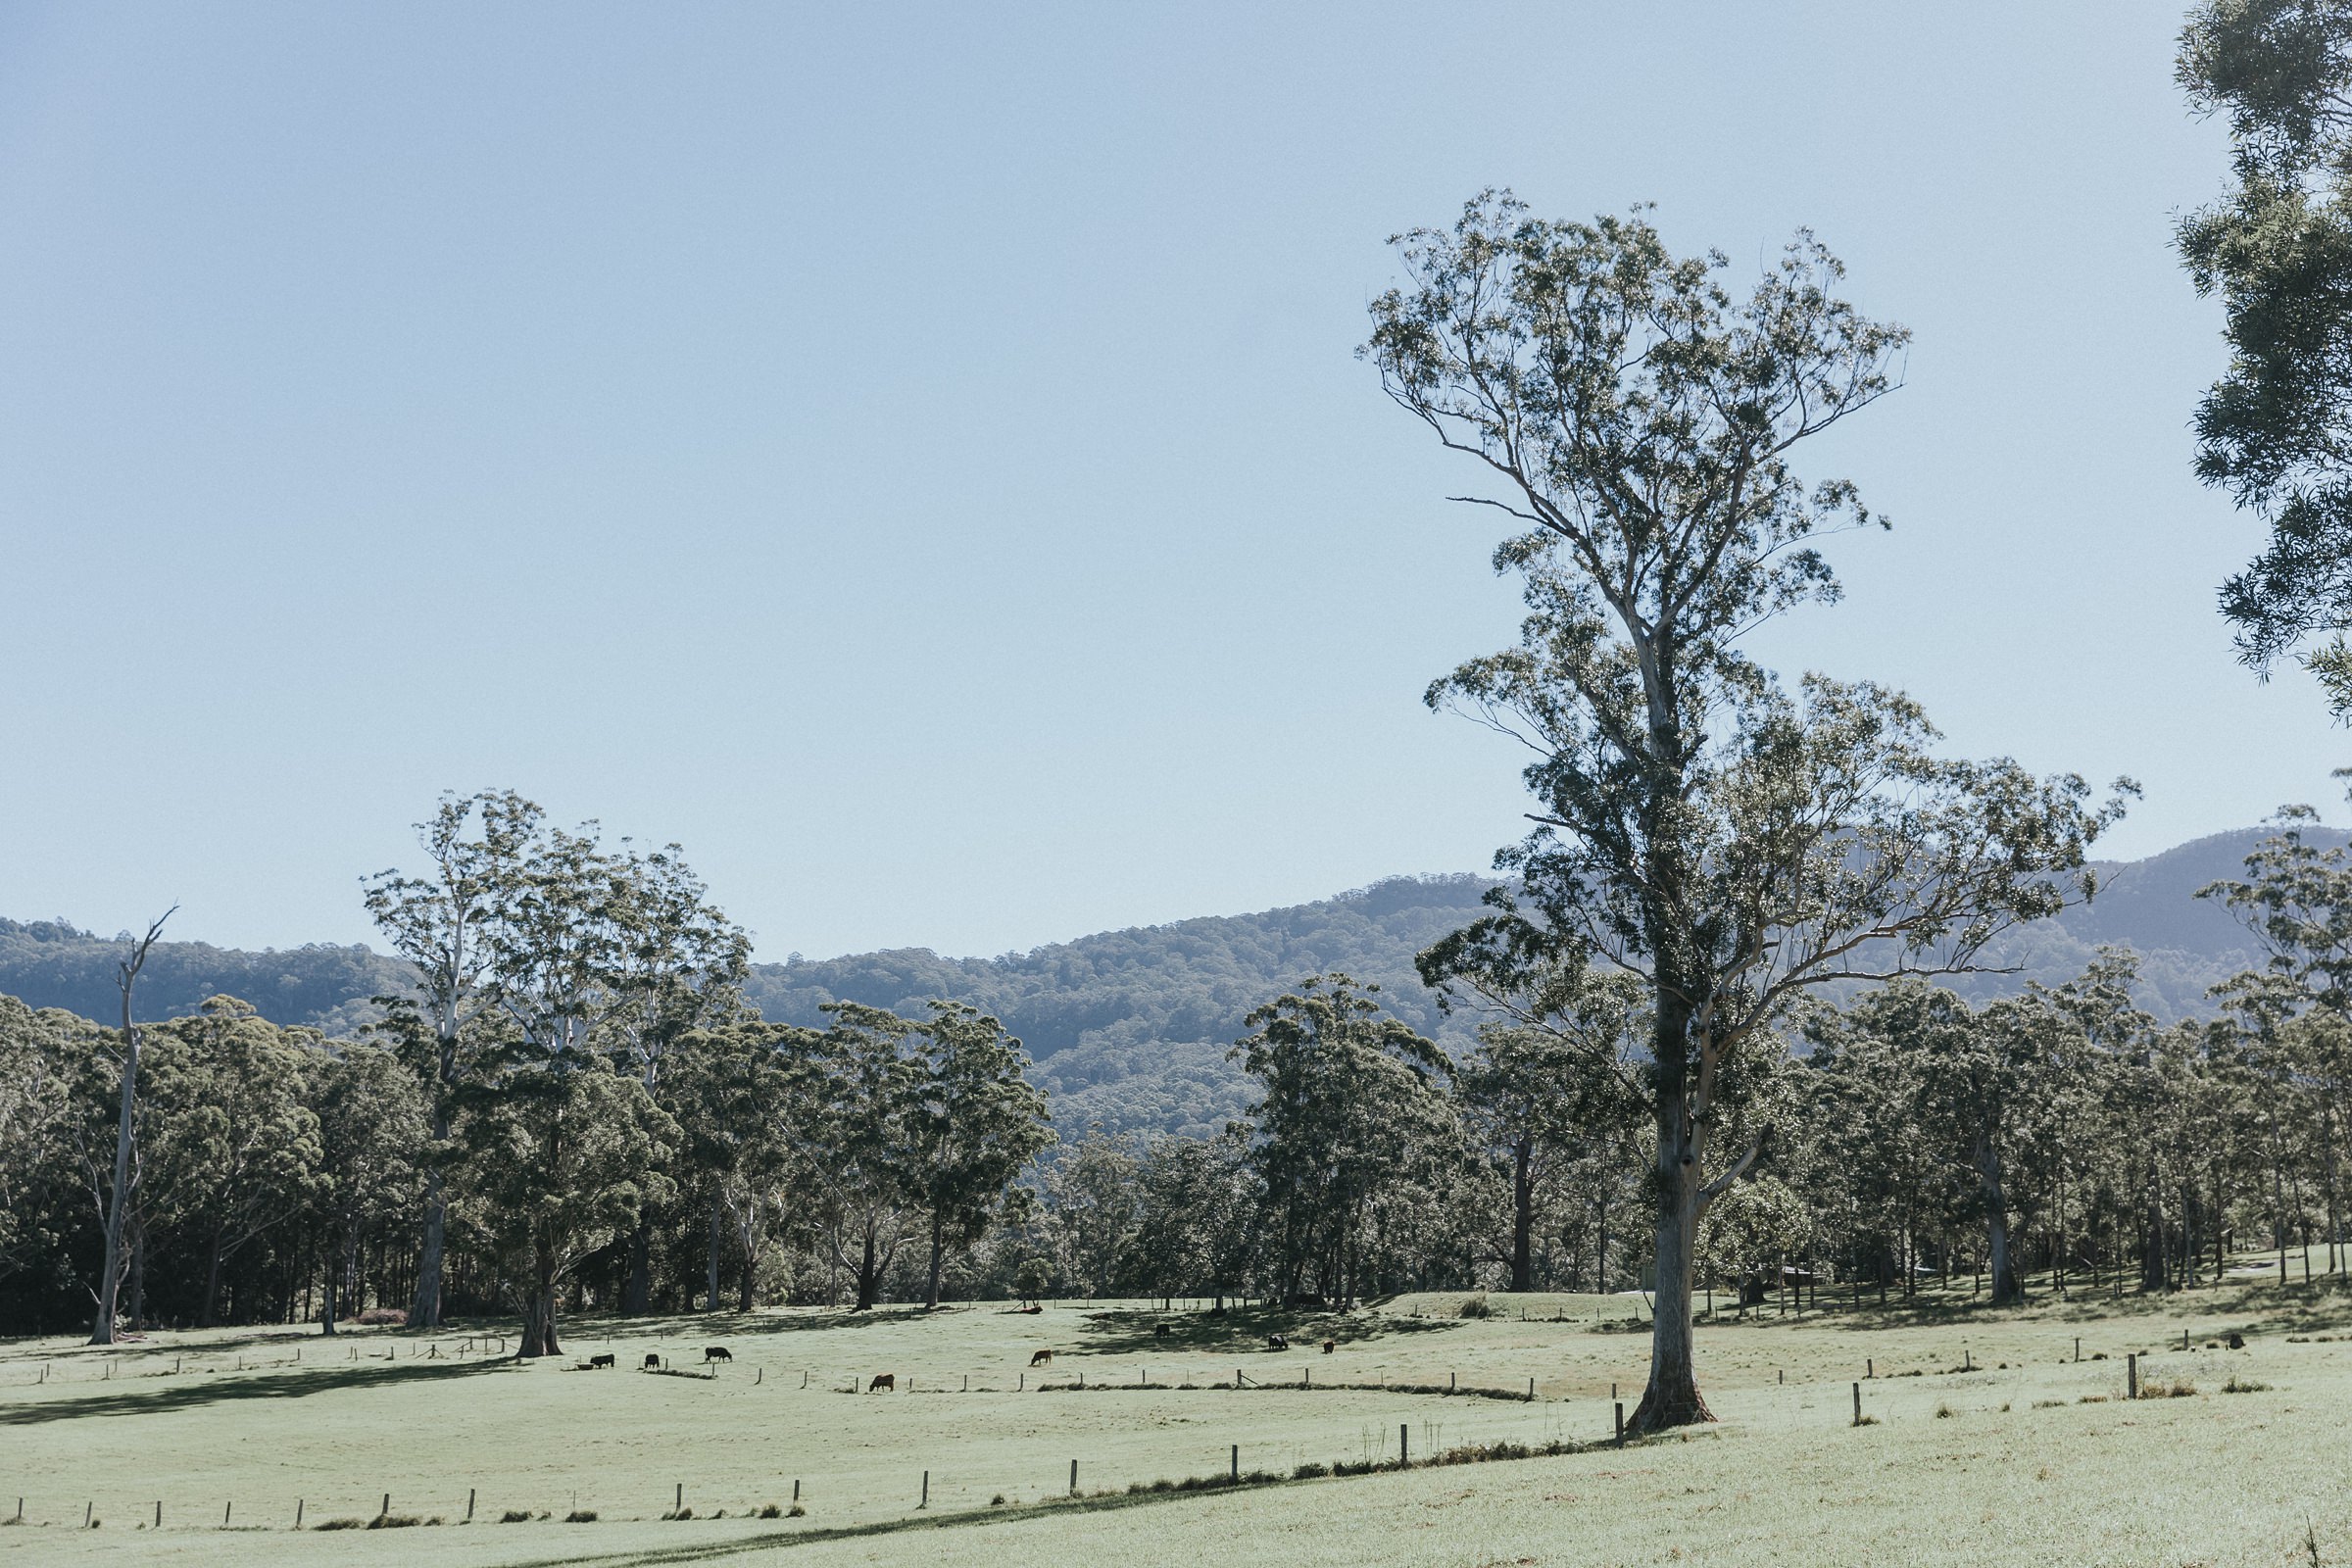 broughton vale scenery for wedding day portraits